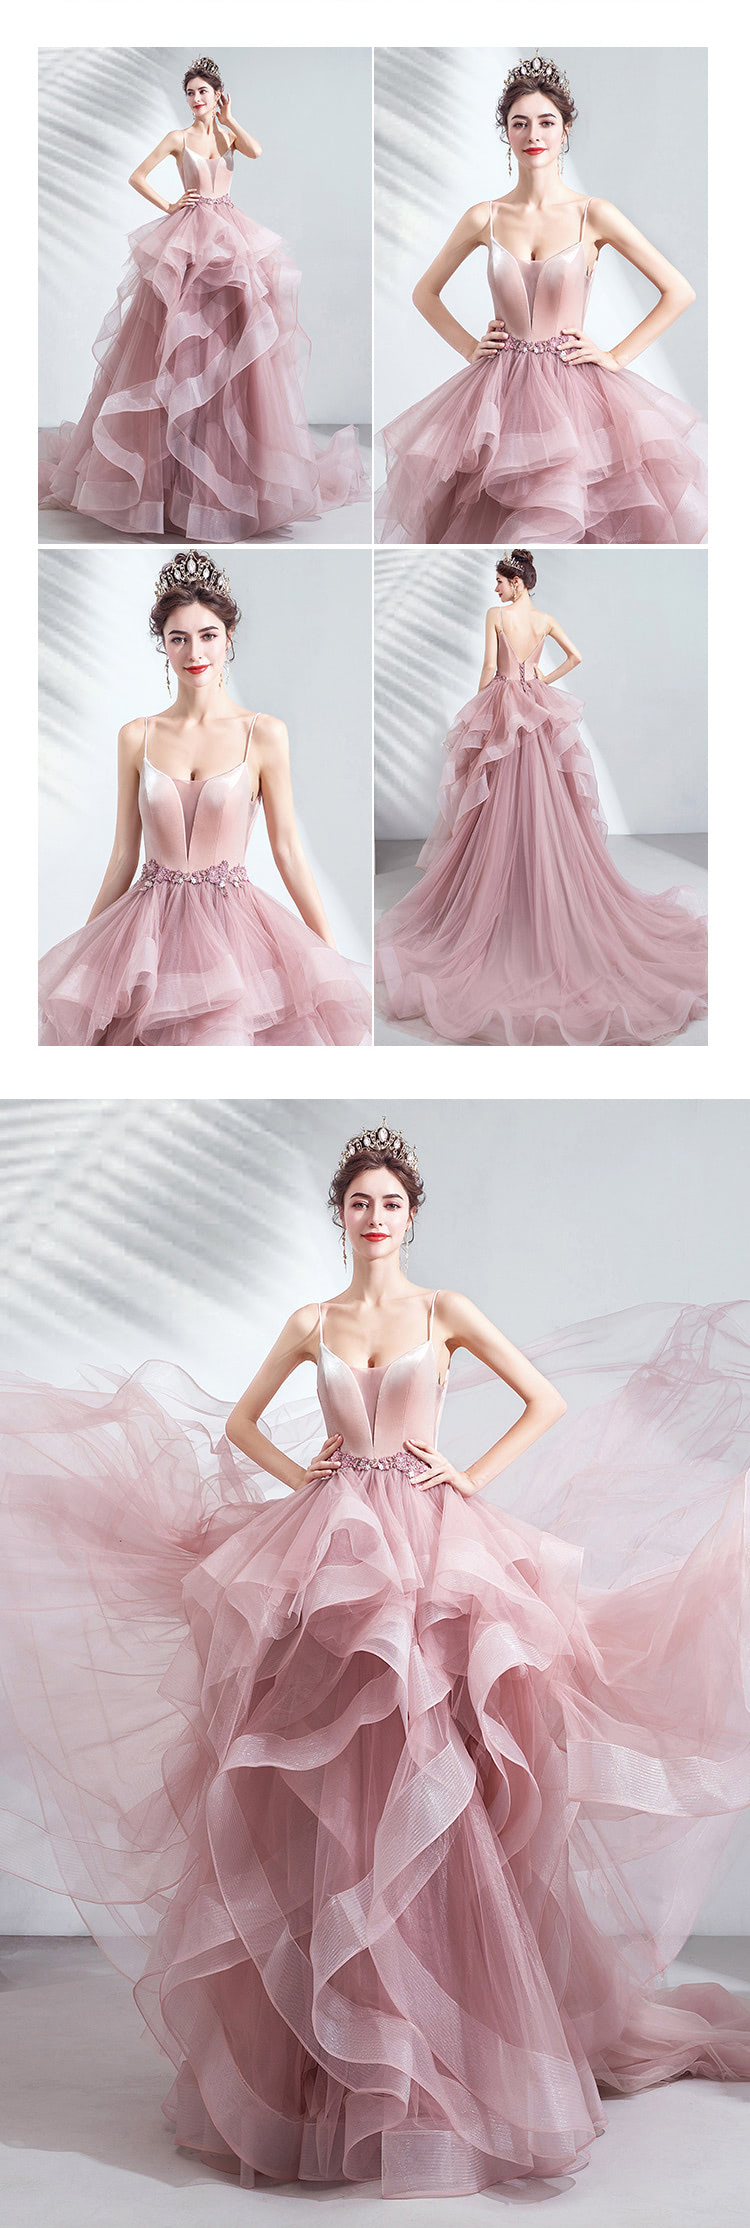 Pink-Layered-Tulle-Banquet-Prom-Party-Evening-Pompon-Skirt-Dress10